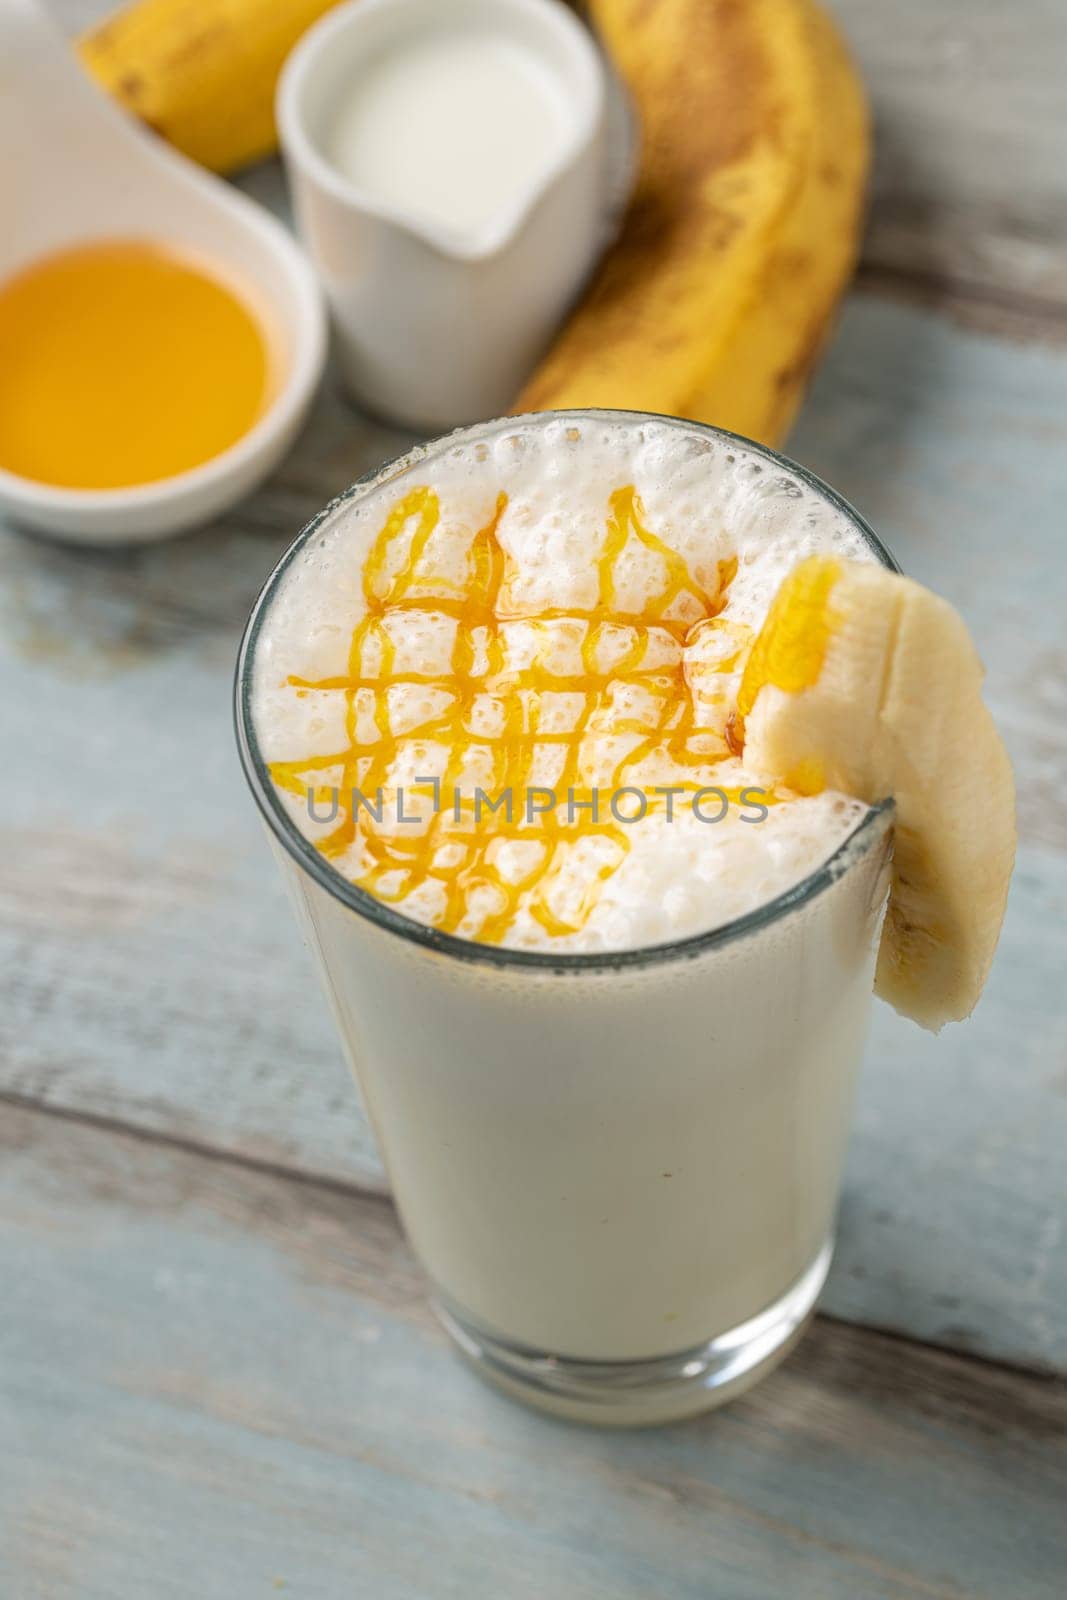 Milk with honey and banana in glass glass on wooden table